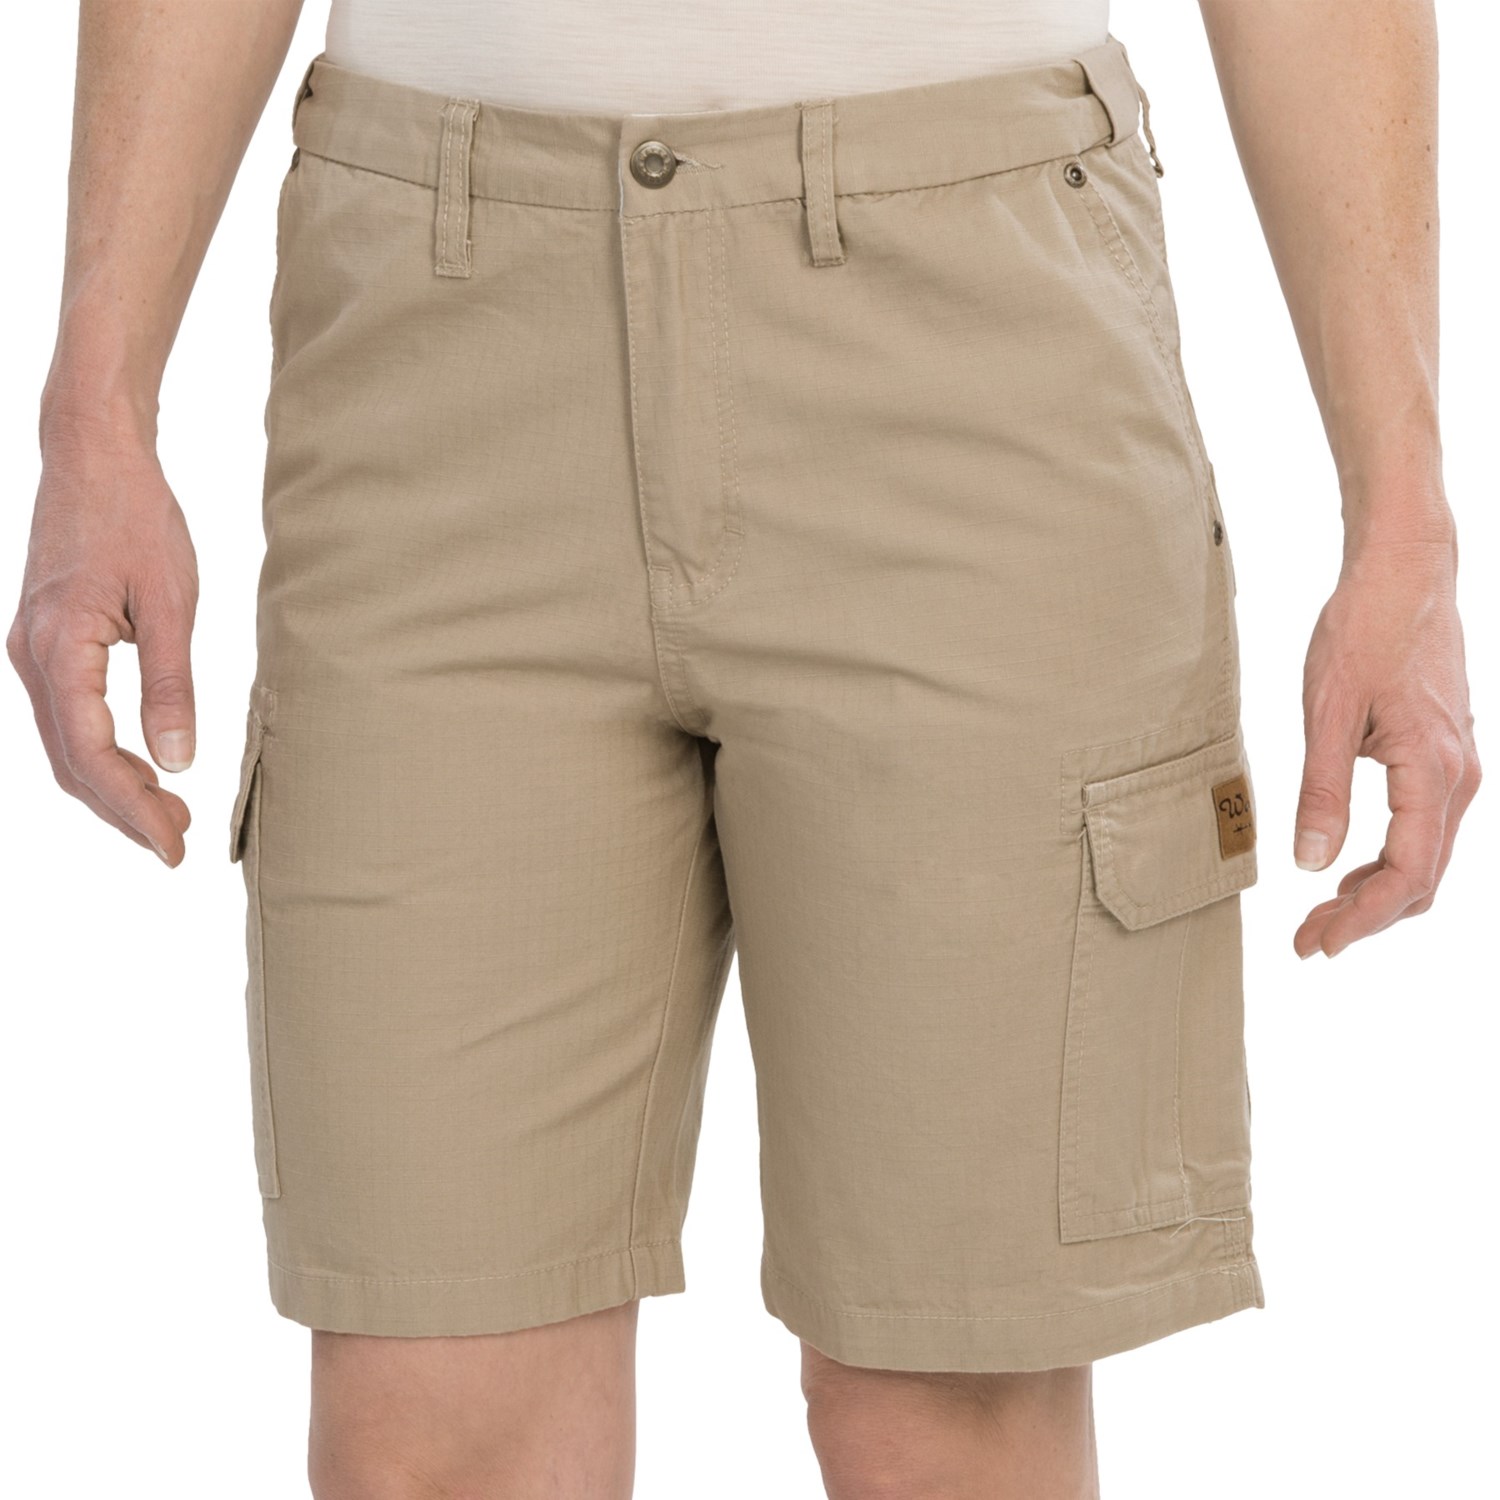 Walls Workwear Cargo Shorts (For Women) 7315V - Save 87%